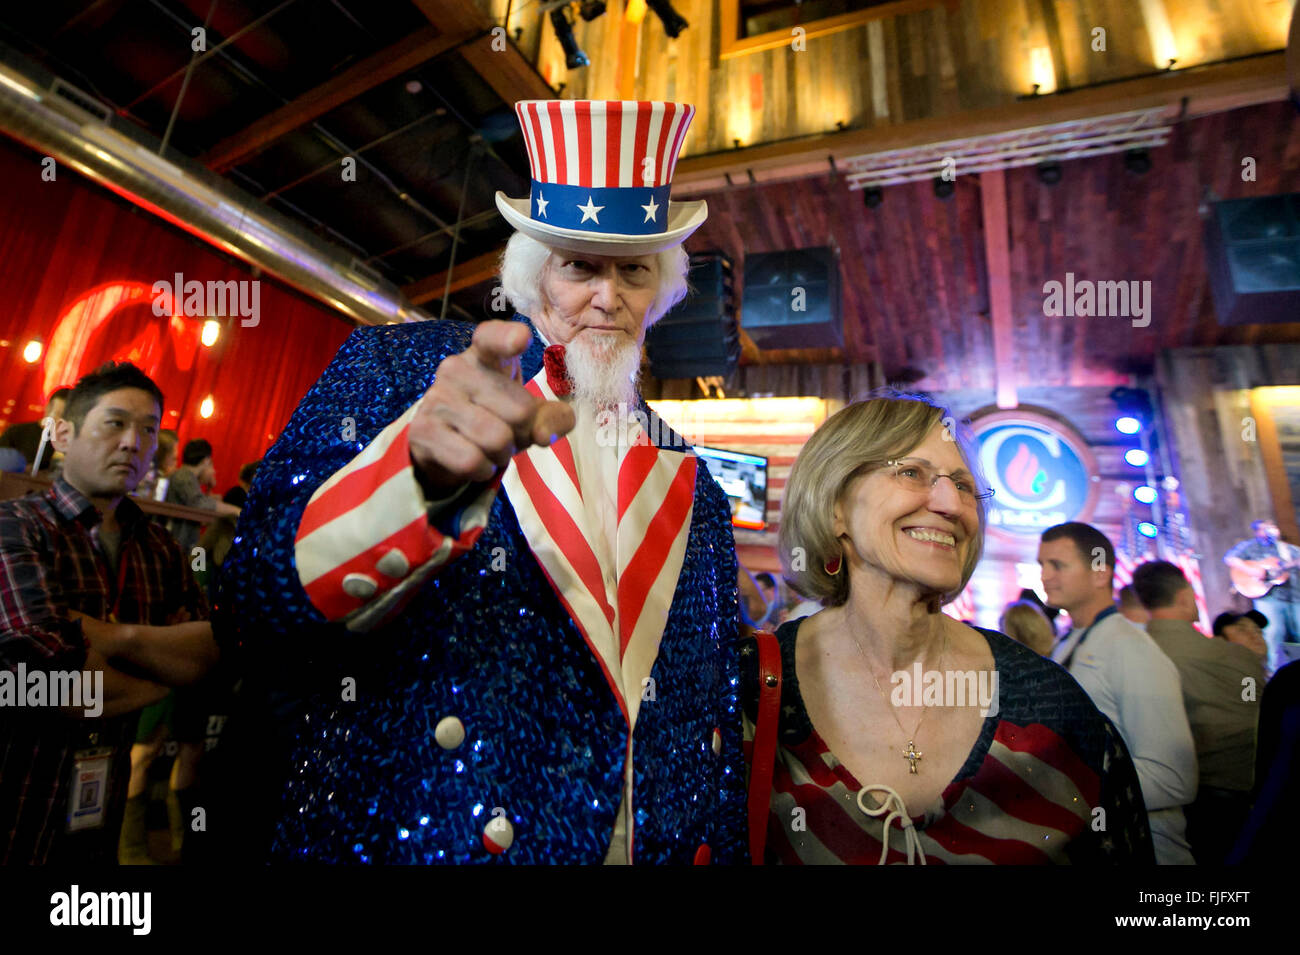 Man dressed as Uncle Sam mingles with supporters at Republican presidential hopeful Ted Cruz's Texas primary victory party Stock Photo